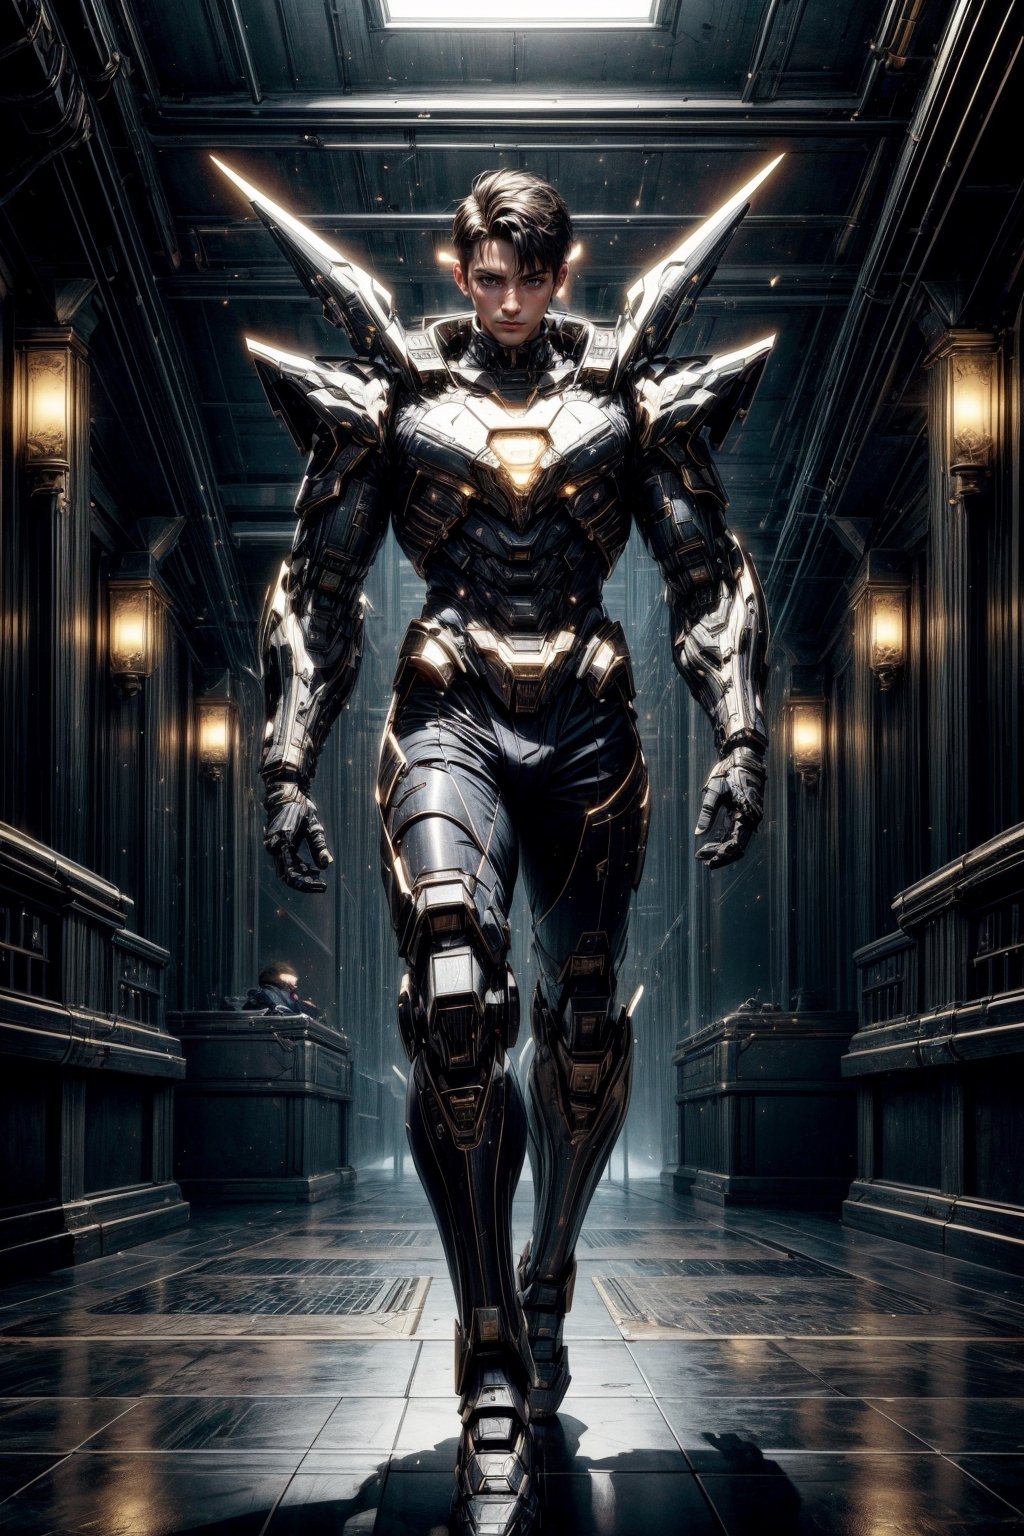 science fiction, (1male_boy:1.9), brunette short military hair curt, black eyes, purple and black colors ultimate mecha shadow armor sci-fi, full body, epic futuristic city background, standing pose,neotech,

PNG image format, sharp lines and edges, solid blocks of colors, 300+ dpi dots per inch, 32k ultra high definition, photorealistic: 1.5, photography, masterpiece, realistic, realism, photorealism, high contrast, digital art trending on Artstation ultra high definition. realistic detailed, detailed, skin texture, hyper detailed, realistic skin texture, facial features, best quality, ultra high resolution, high resolution, detailed, raw photo, sharpness, rich lens colors, hyper realistic realistic texture, lighting dramatic, unrealistic motor tendencies, ultra sharp, intricate details, vibrant colors, perfect feet, sexy legs, perfect hands, sexy arms, highly detailed skin, textured skin, defined body features, detailed shadows,  aesthetic, perfectly symmetrical body,

LineAniRedmondV2-Lineart-LineAniAF:0.8, SDXLanime:0.8, perfecteyes-000007:1.3, EpicAnimeDreamscapeXL:0.8,Midjourney_Style_Special_Edition_0001:0.8, 3DMM_V1 1: 0.8,3d_toon_xl:0.8,JuggerCineXL2:0.9,detail_master_XL:0.9, detailmaster2.0:0.9,mecha musume,eldritchtech,ZentreyaCyborg,gigachad,AIDA_ColGruBioMec,HIGHLY DETAILED,luxtech